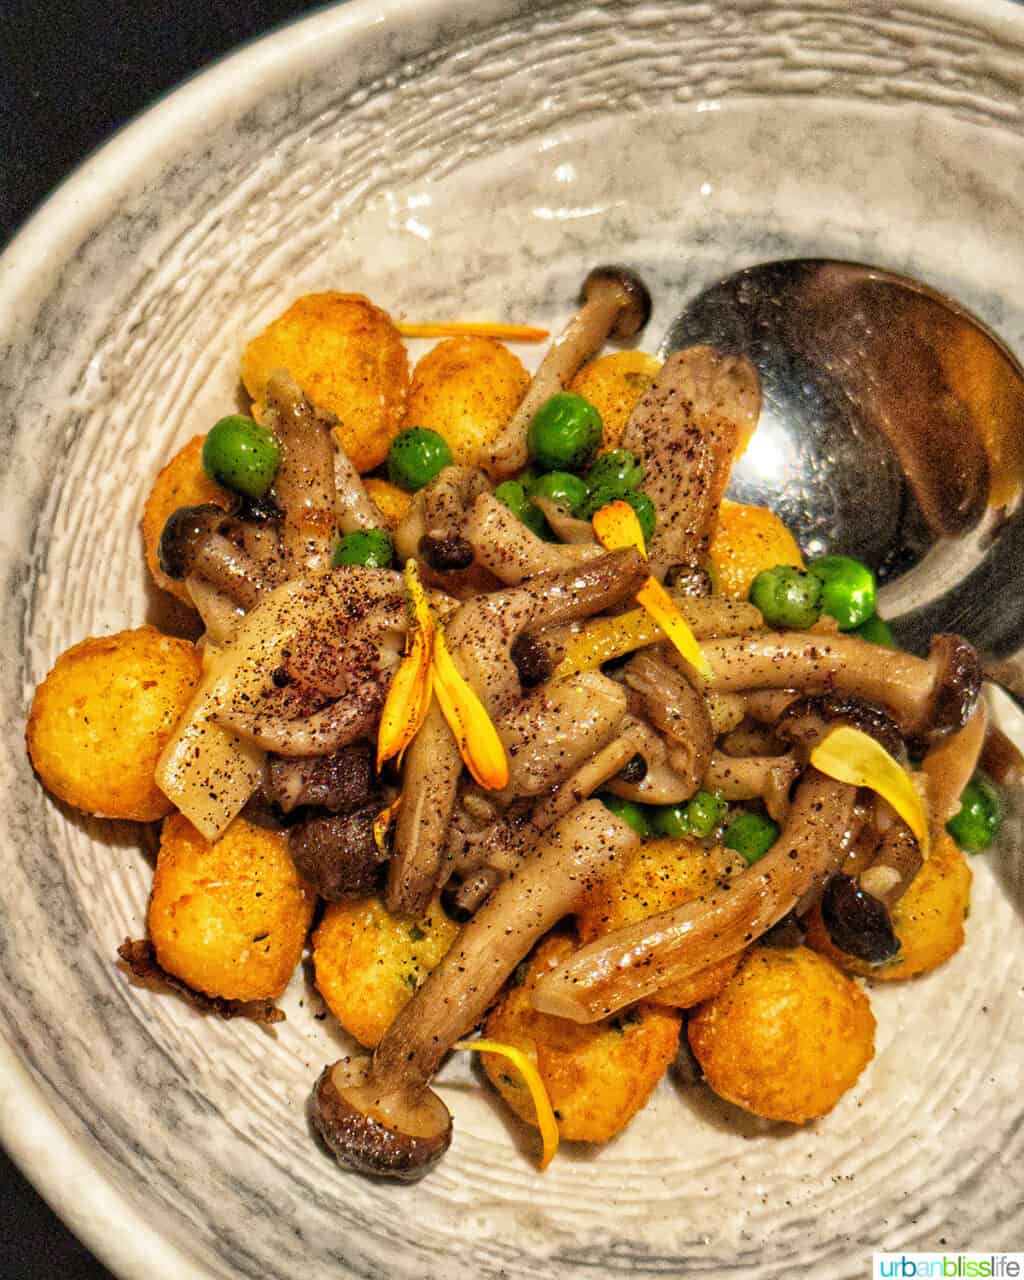 mushrooms, gnocchi, and peas on plate with a spoon.